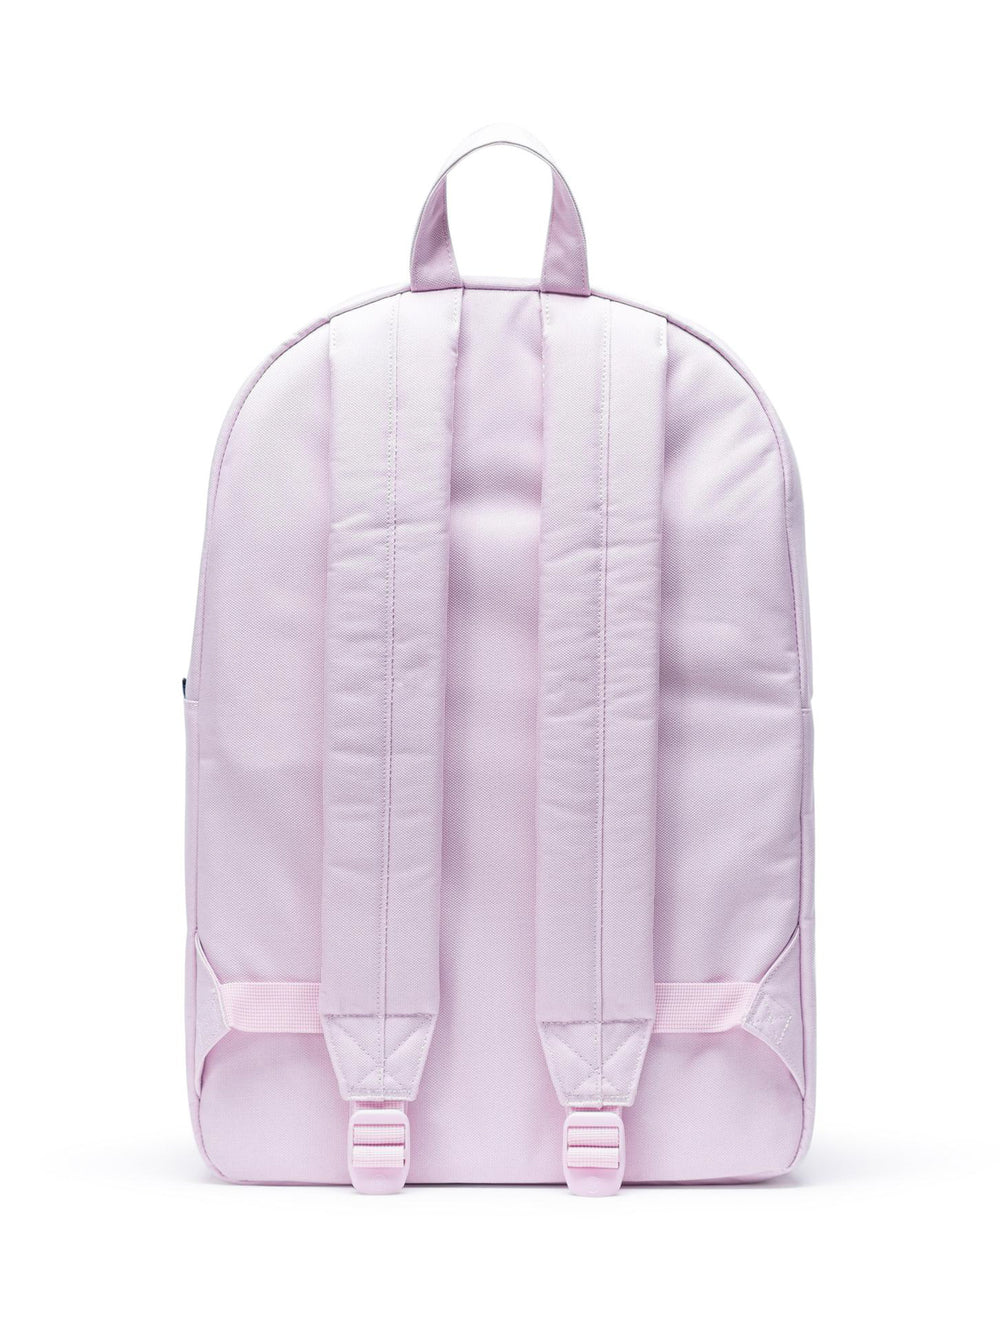 MIDWAY 25L - PINK LADY XHATCH - CLEARANCE